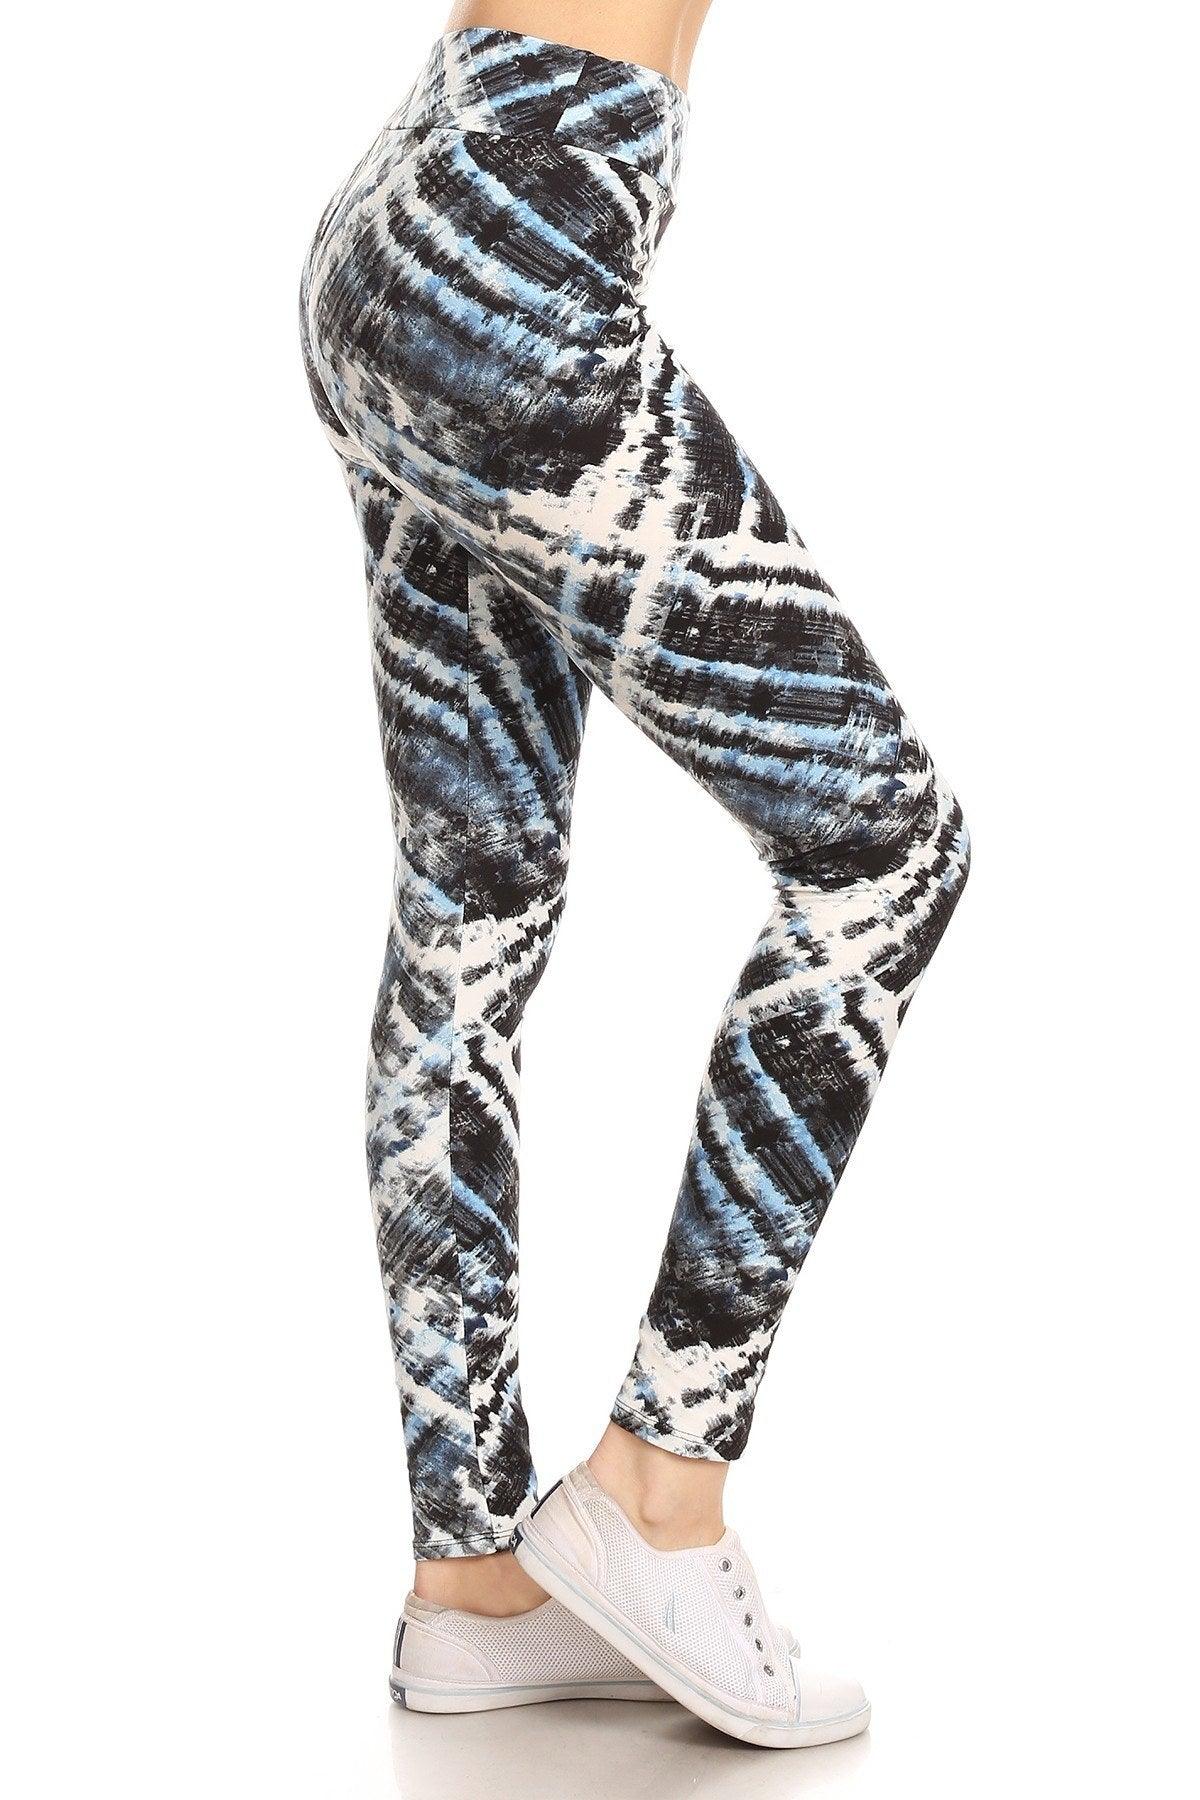 Yoga Style Banded Lined Tie Dye Printed Knit Legging With High Waist Naughty Smile Fashion